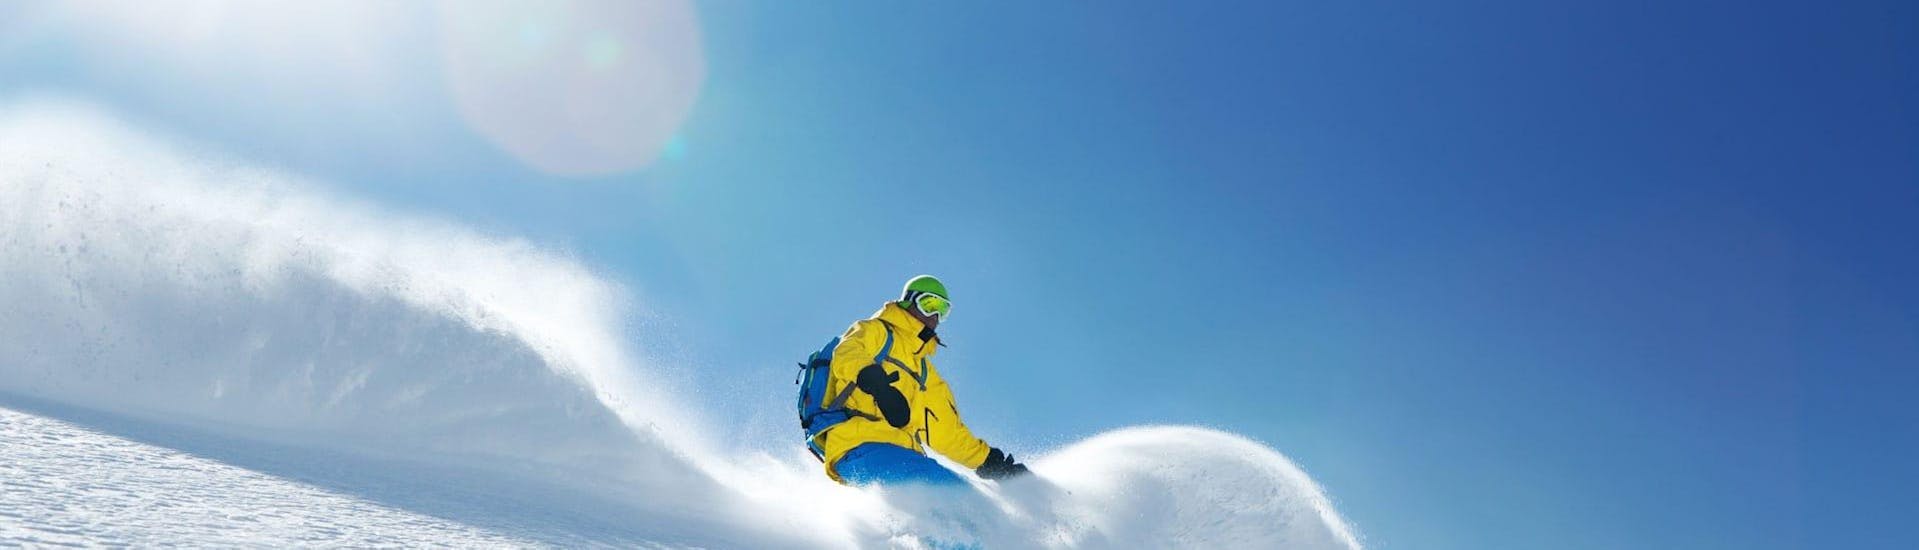 Private Snowboarding Lessons for Kids & Adults of All Levels in Großarl from Skischule Toni Gruber.